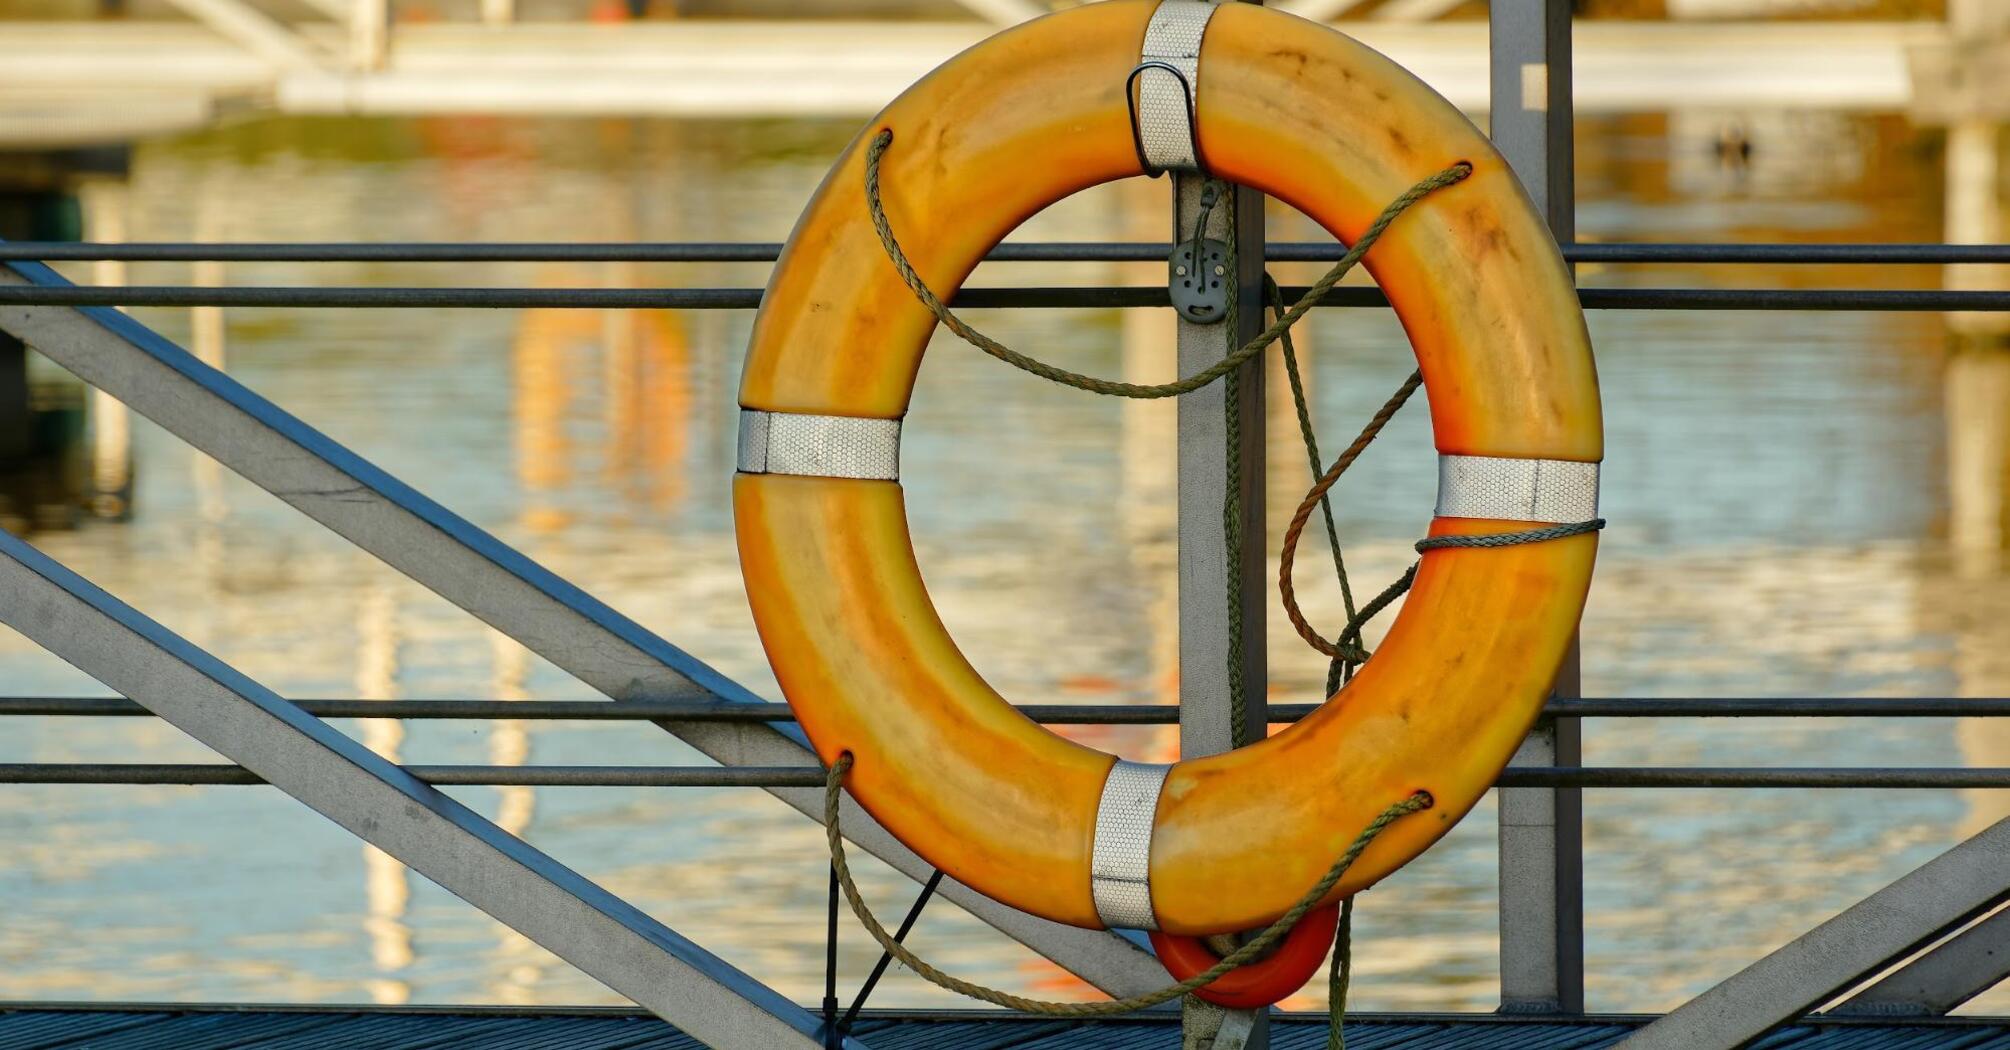 An orange lifebuoy hanging on a metal structure by the water